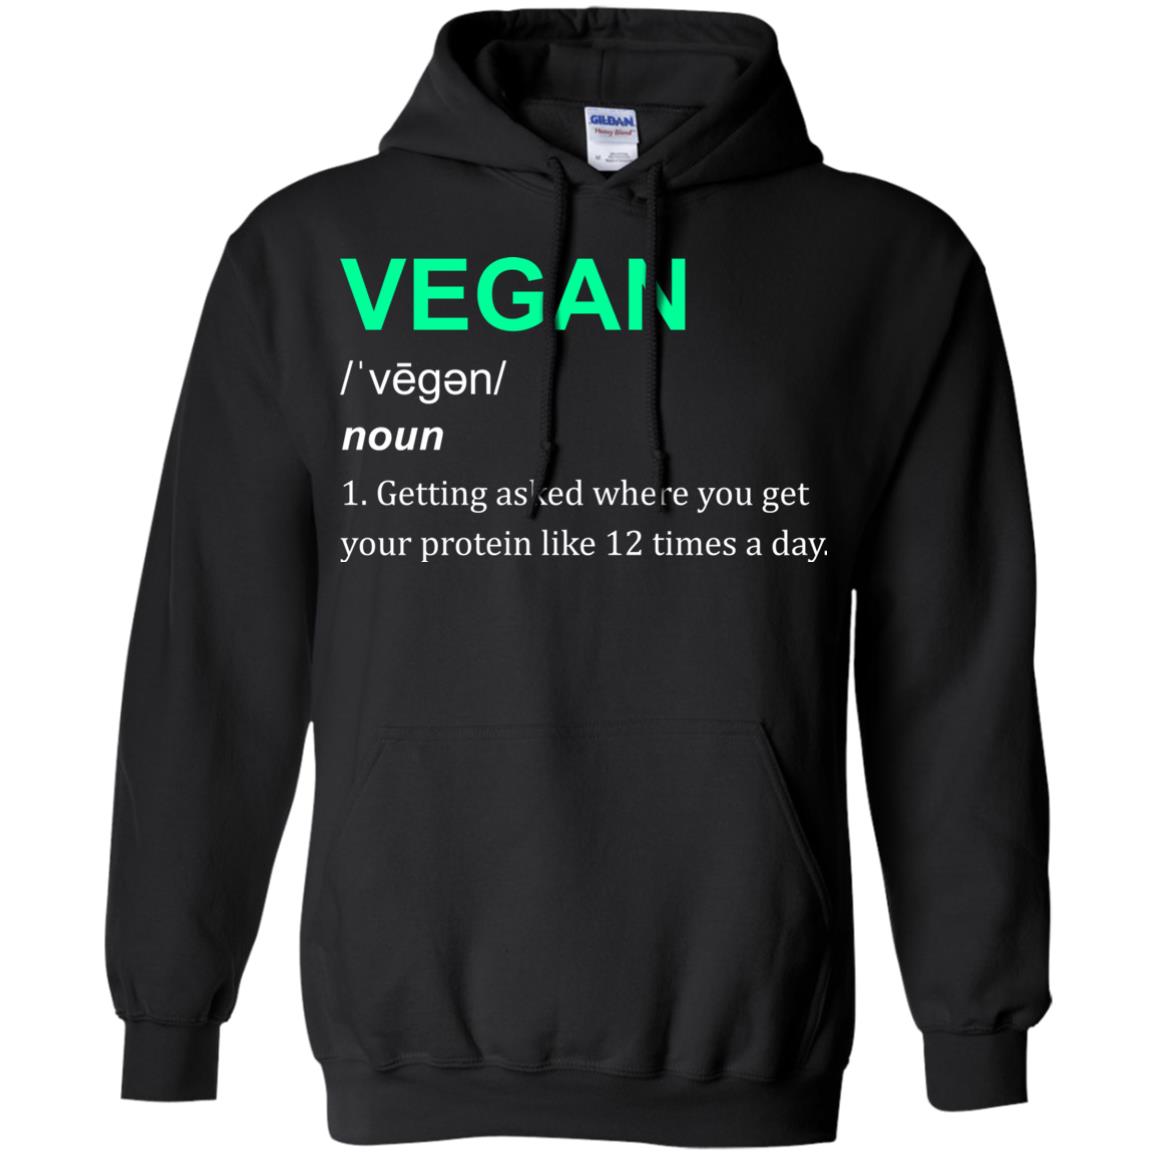 Vegan Shirt You Get Your Protein Like 12 Times A Day